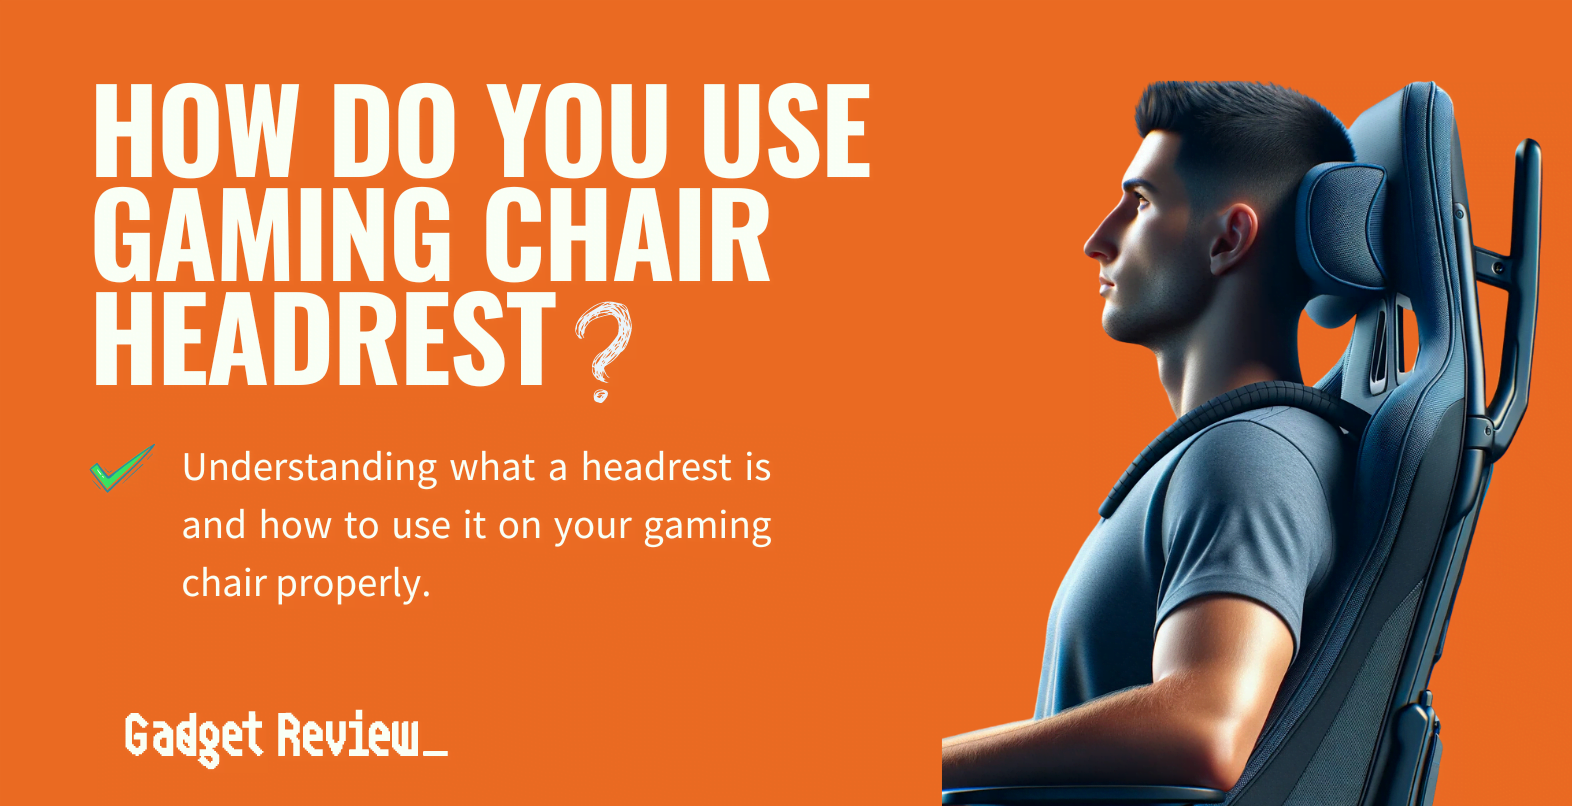 How Do You Use A Gaming Chair Headrest?